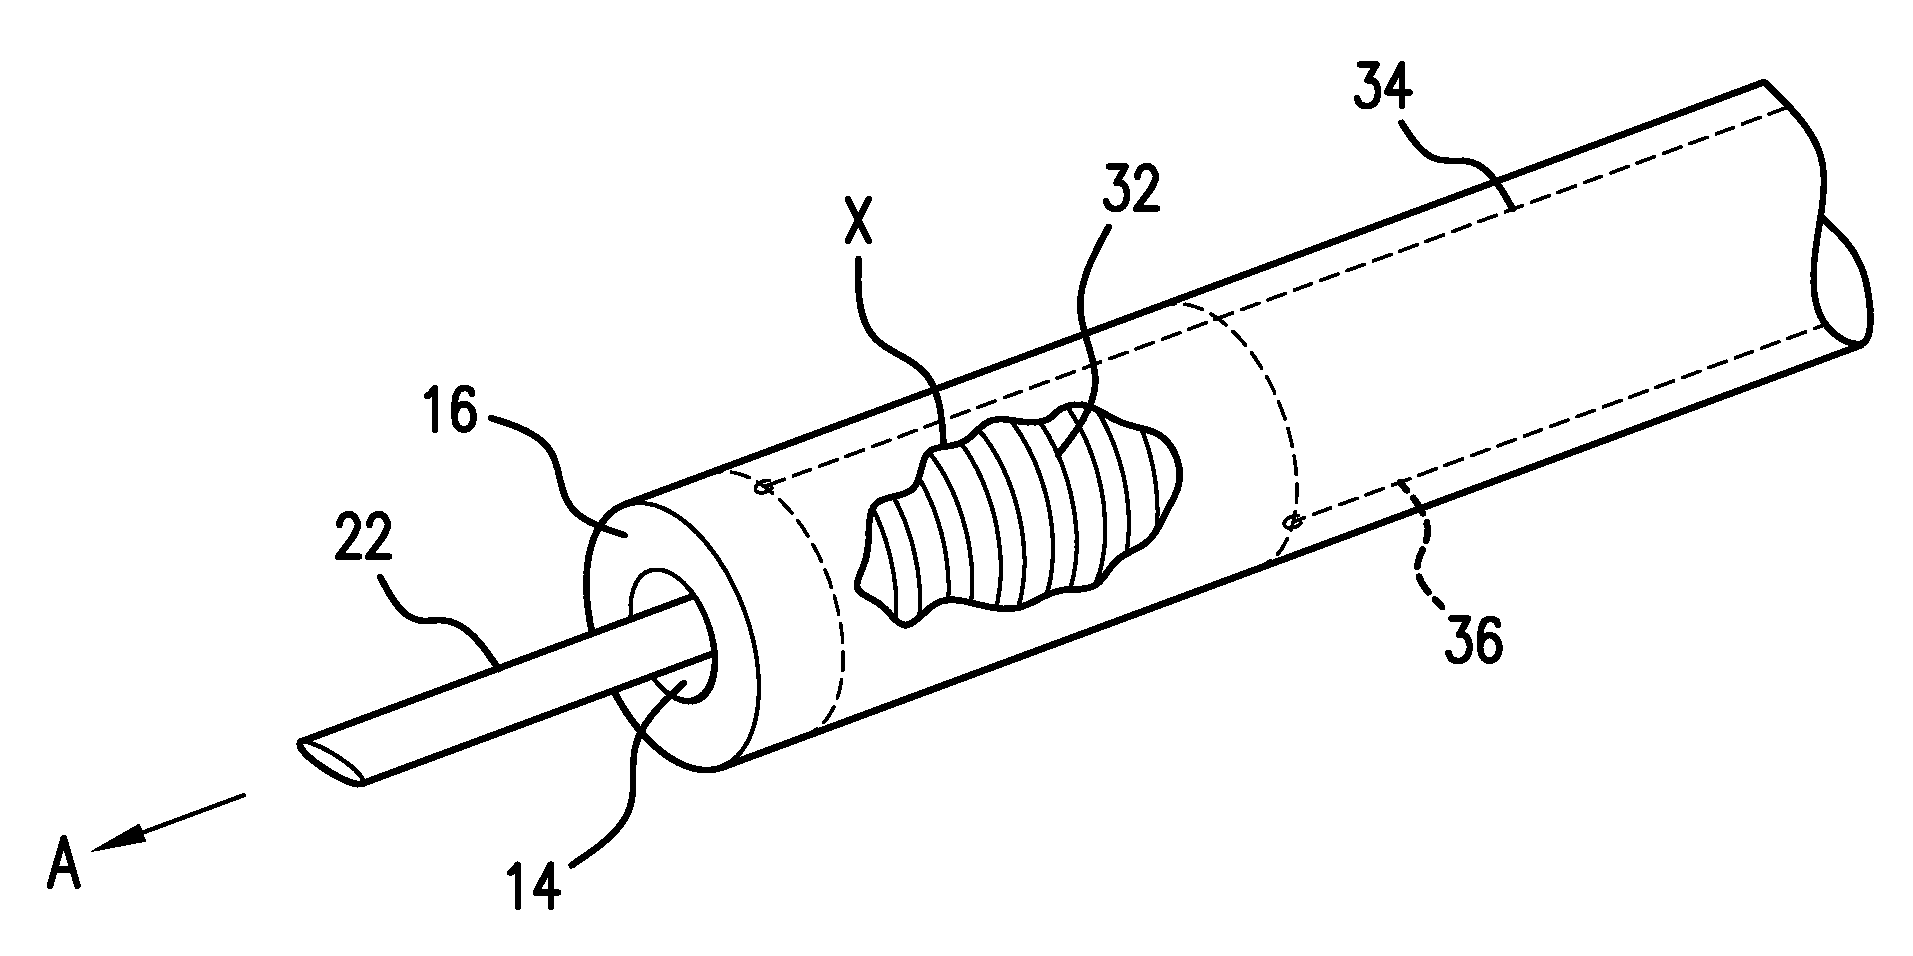 Therapeutic catheter with displacement sensing transducer